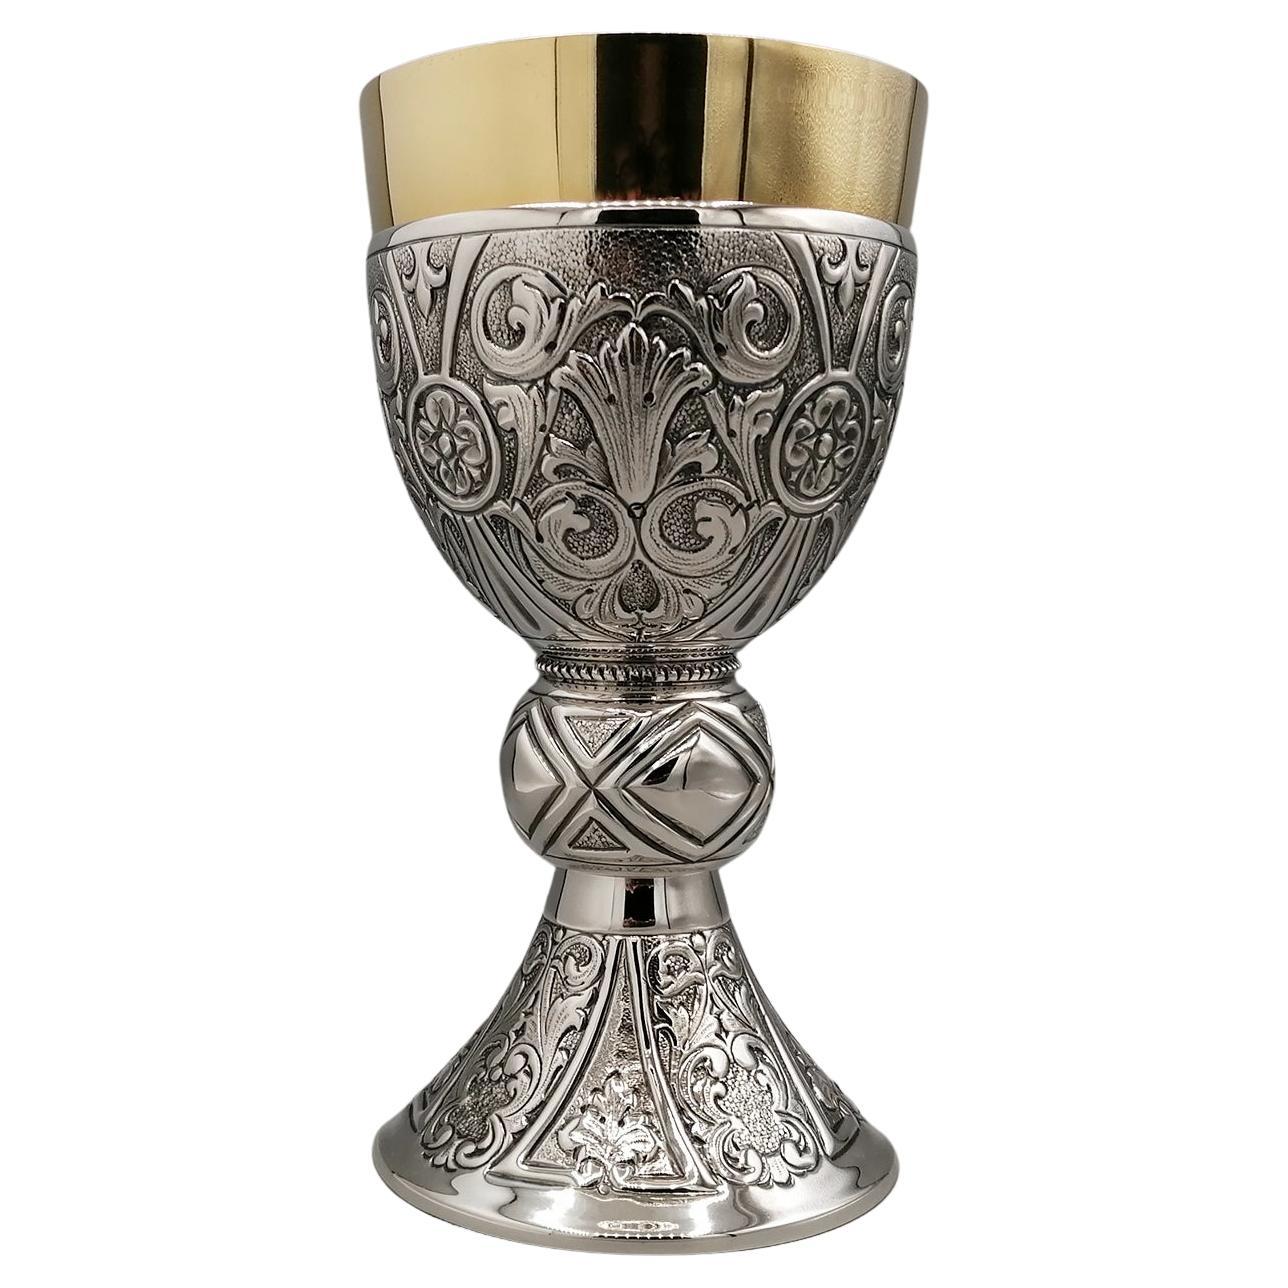 What is a chalice used for?